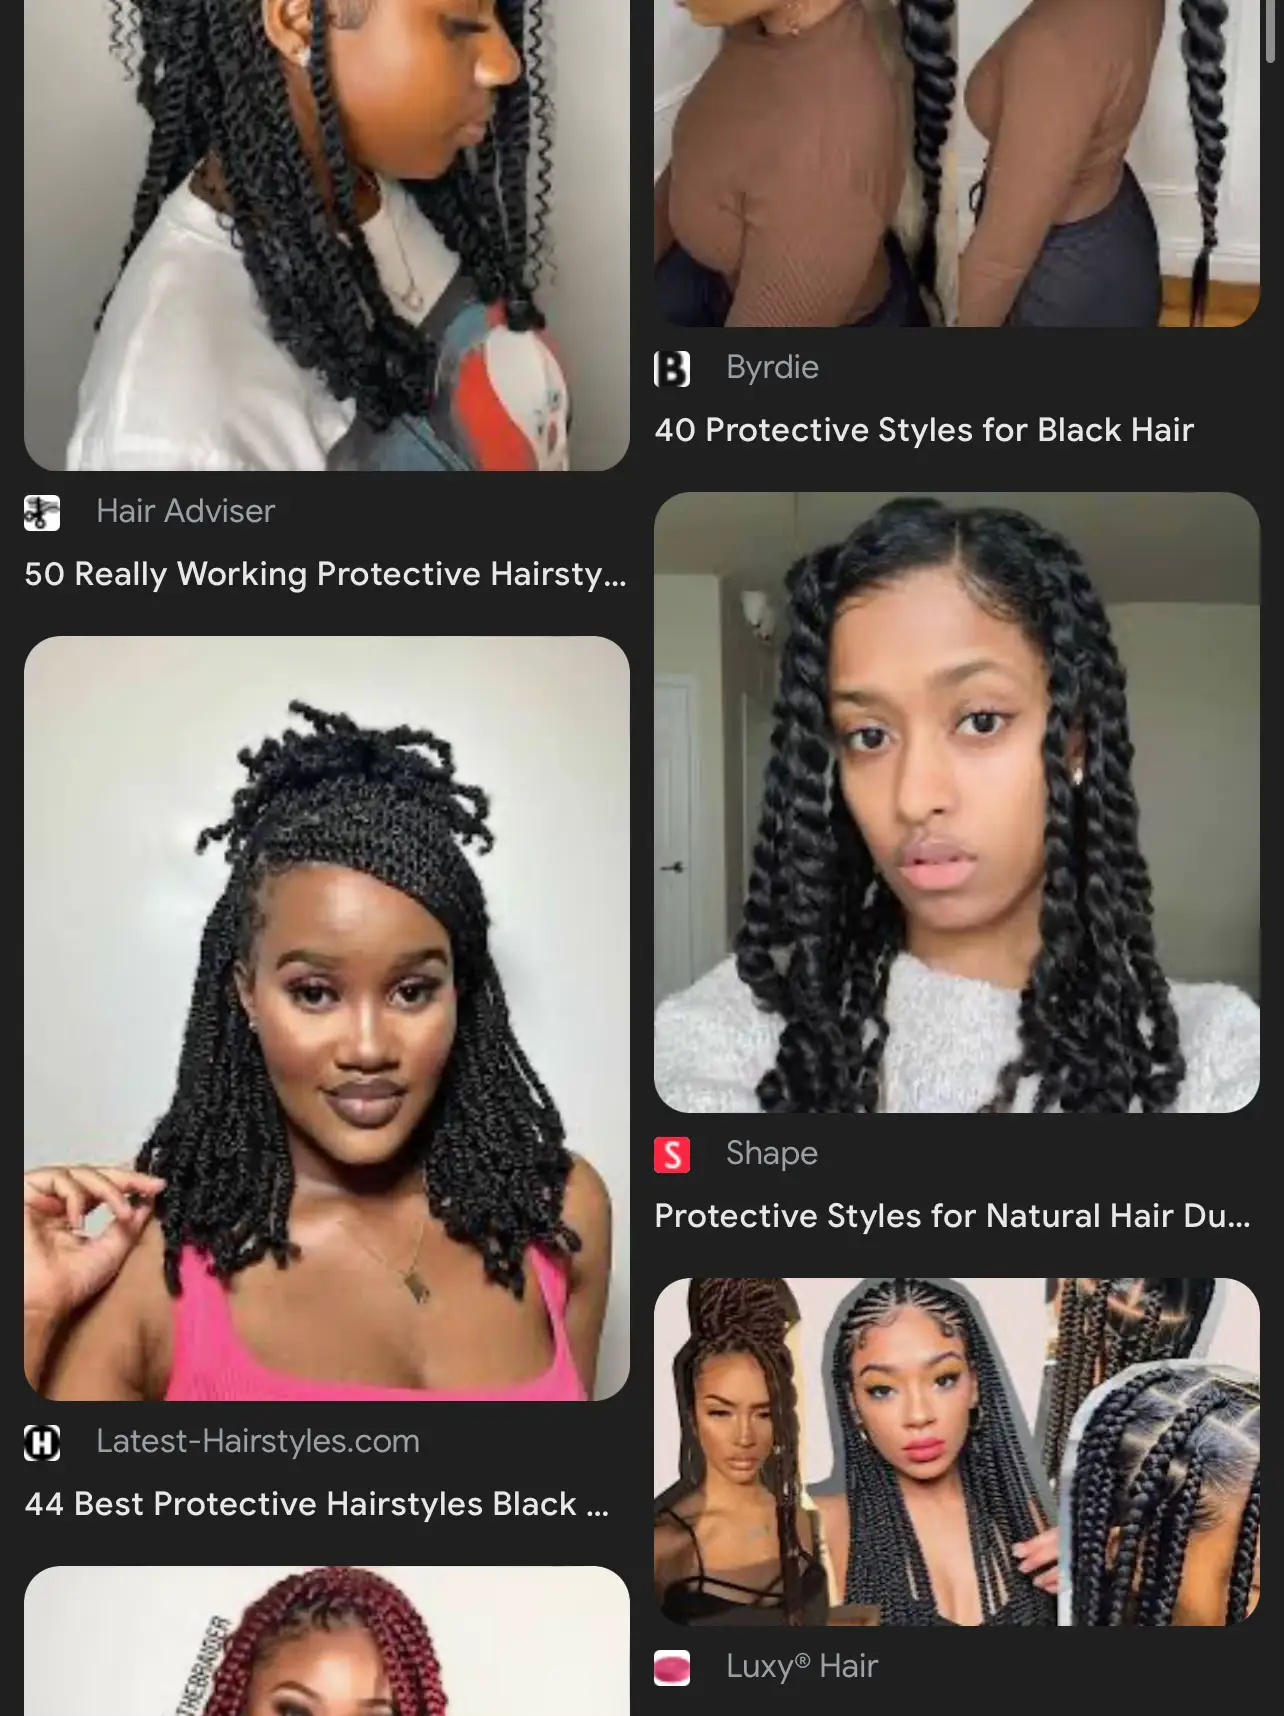 50 Really Working Protective Hairstyles to Restore Your Hair